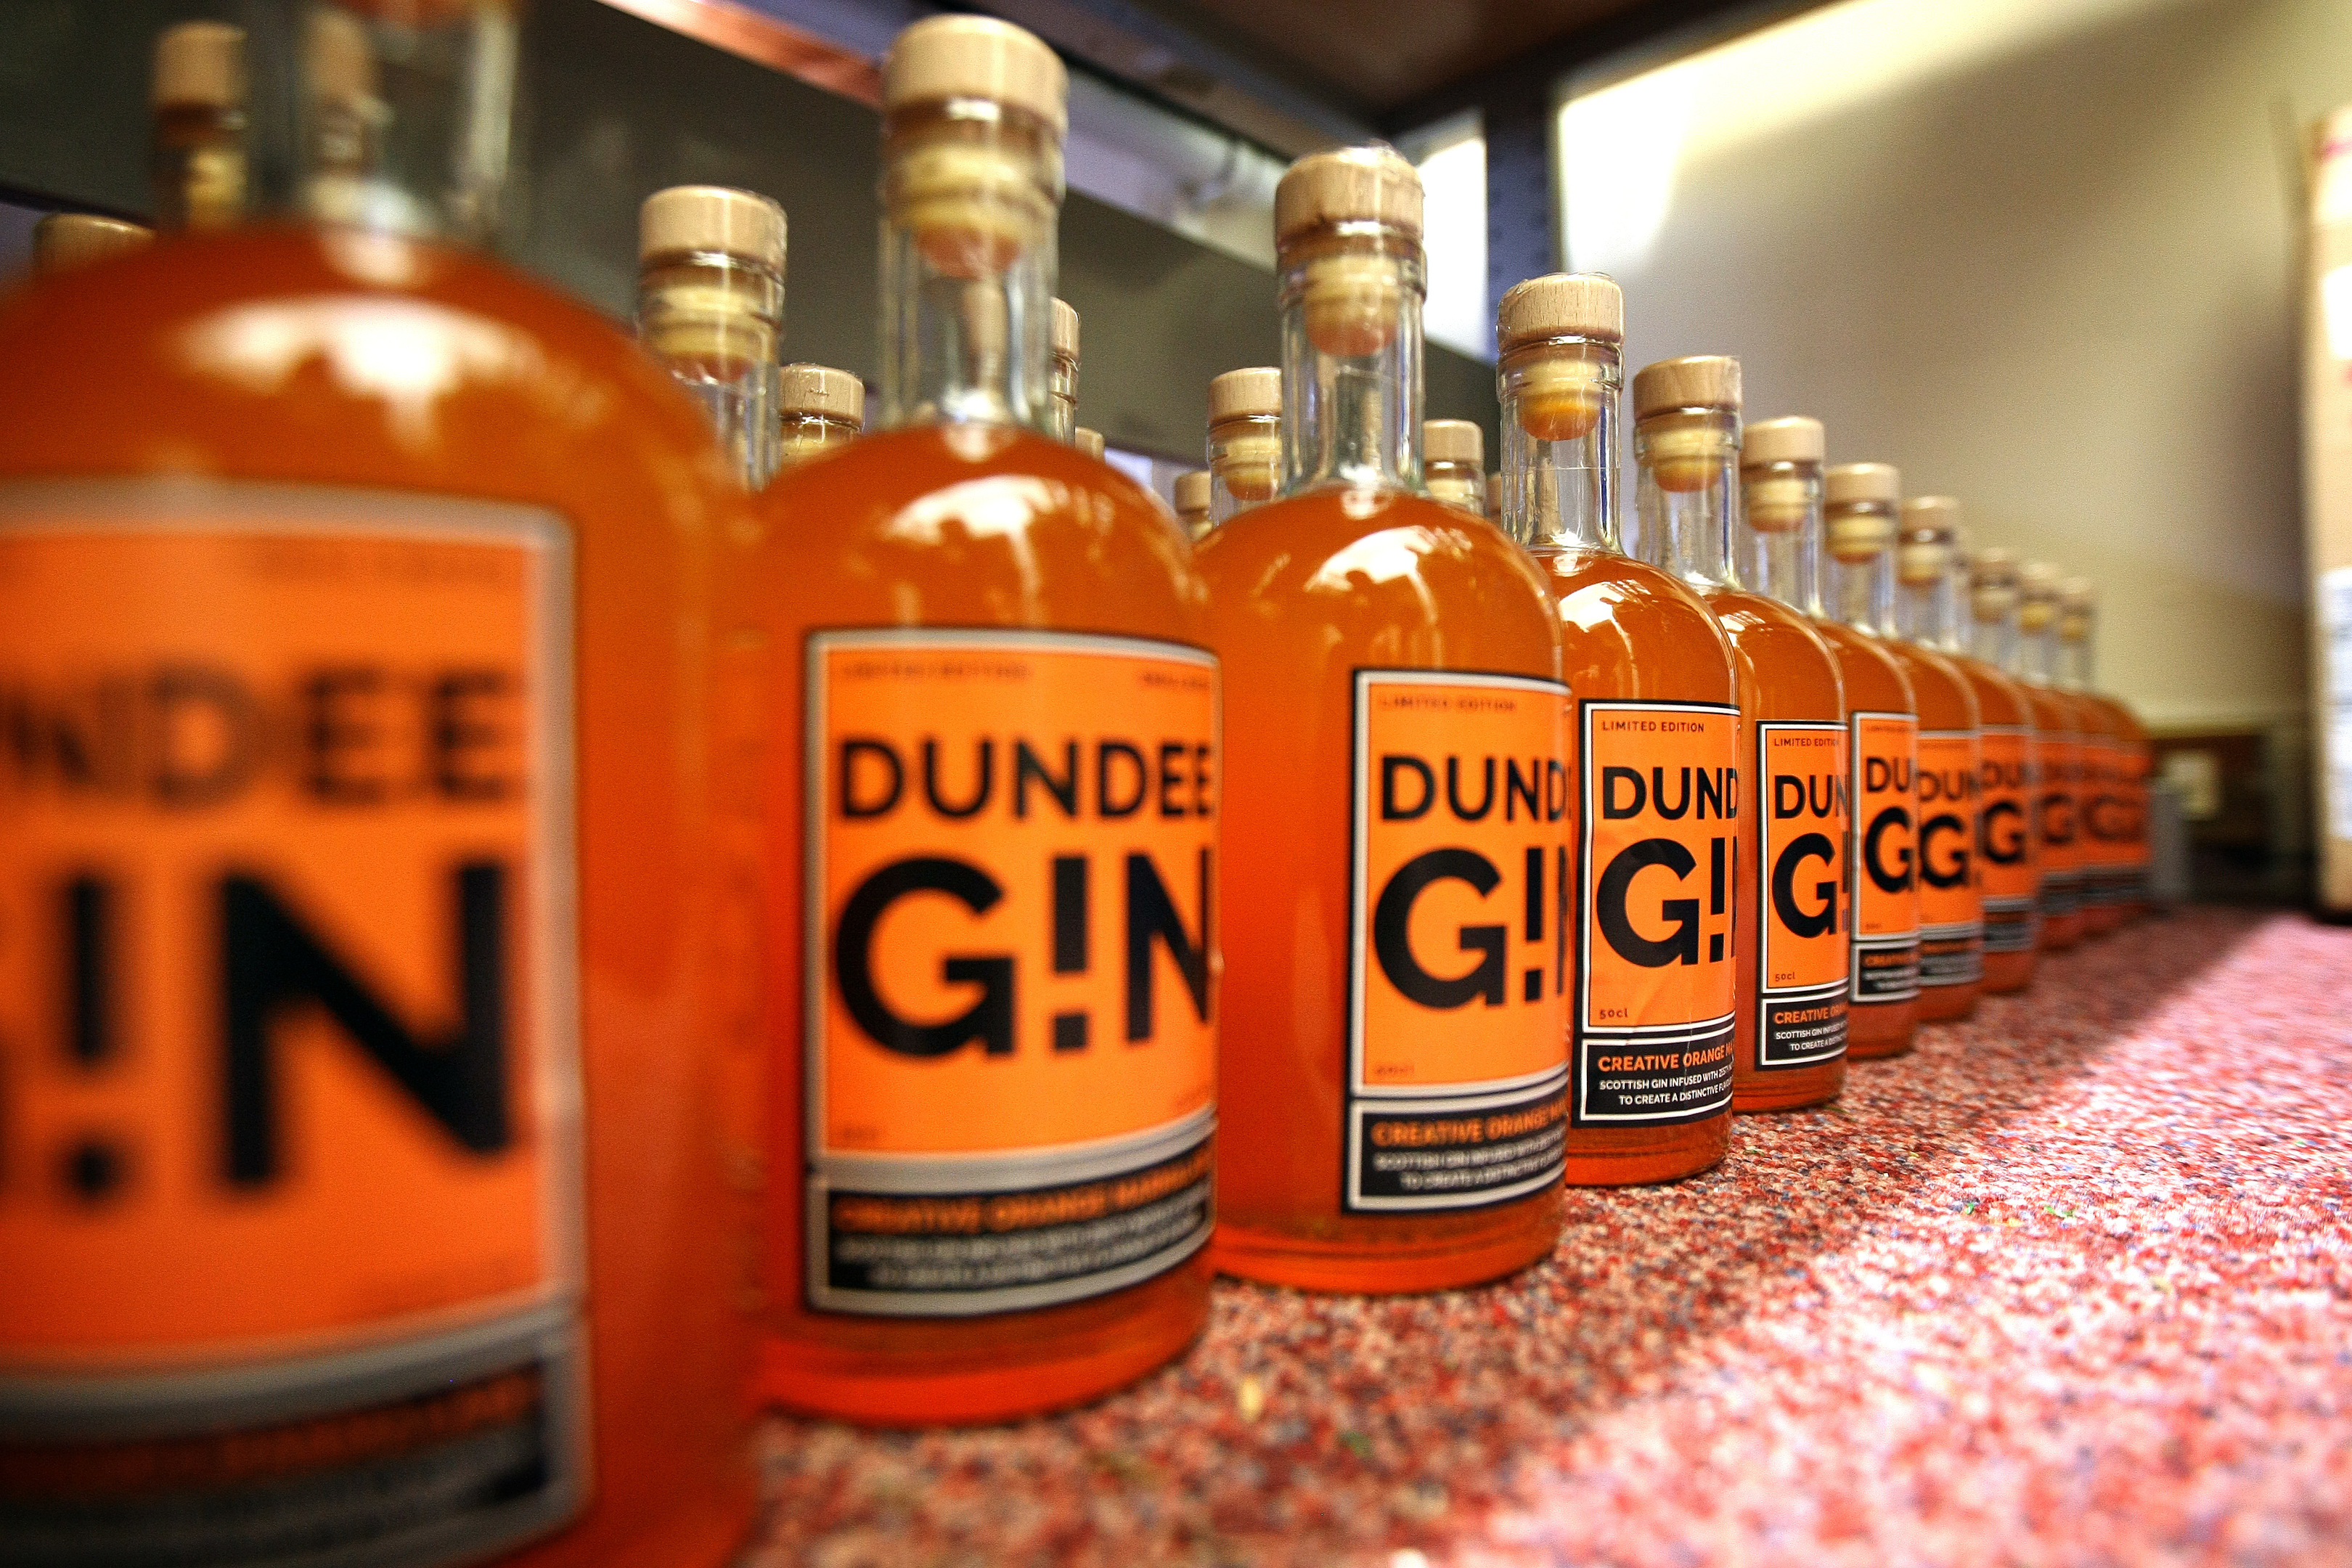 Dundee Gin is about to hit the shelves.